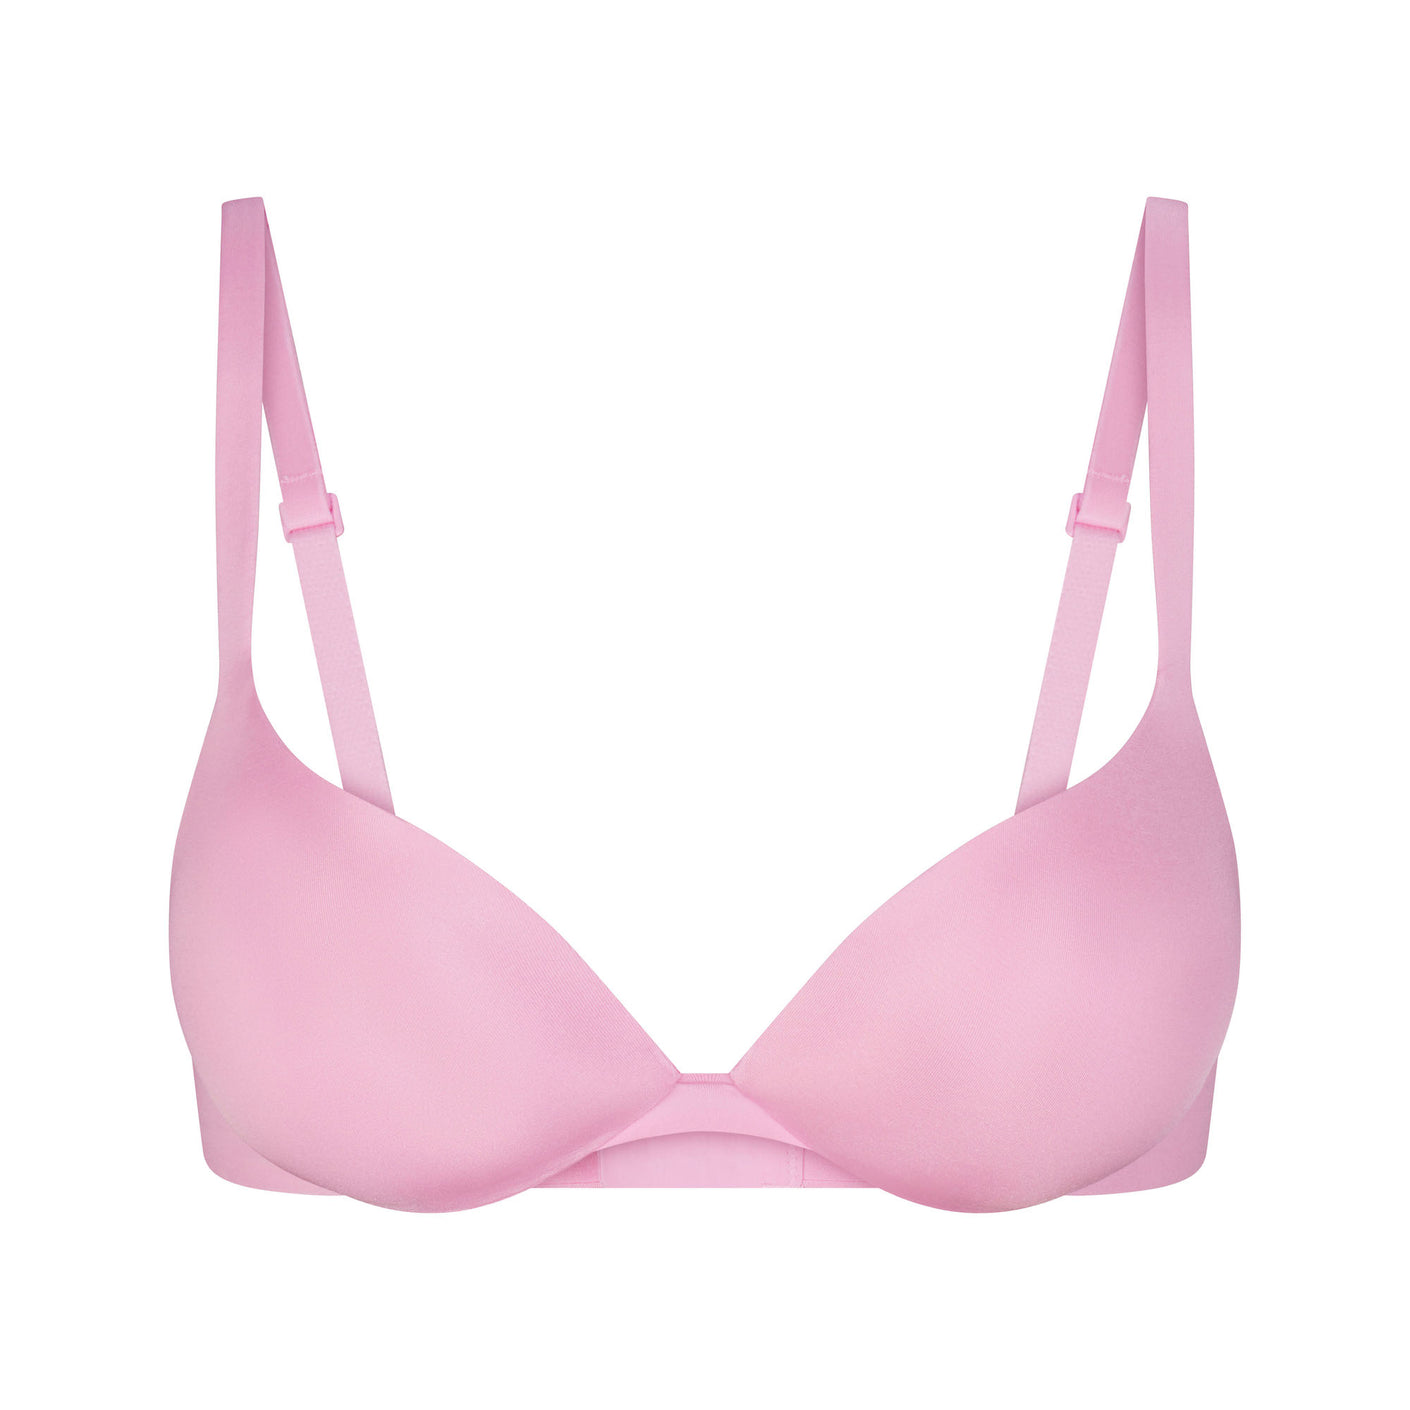 Skims reinvents the push up bra with the Ultimate Bra: Designed to